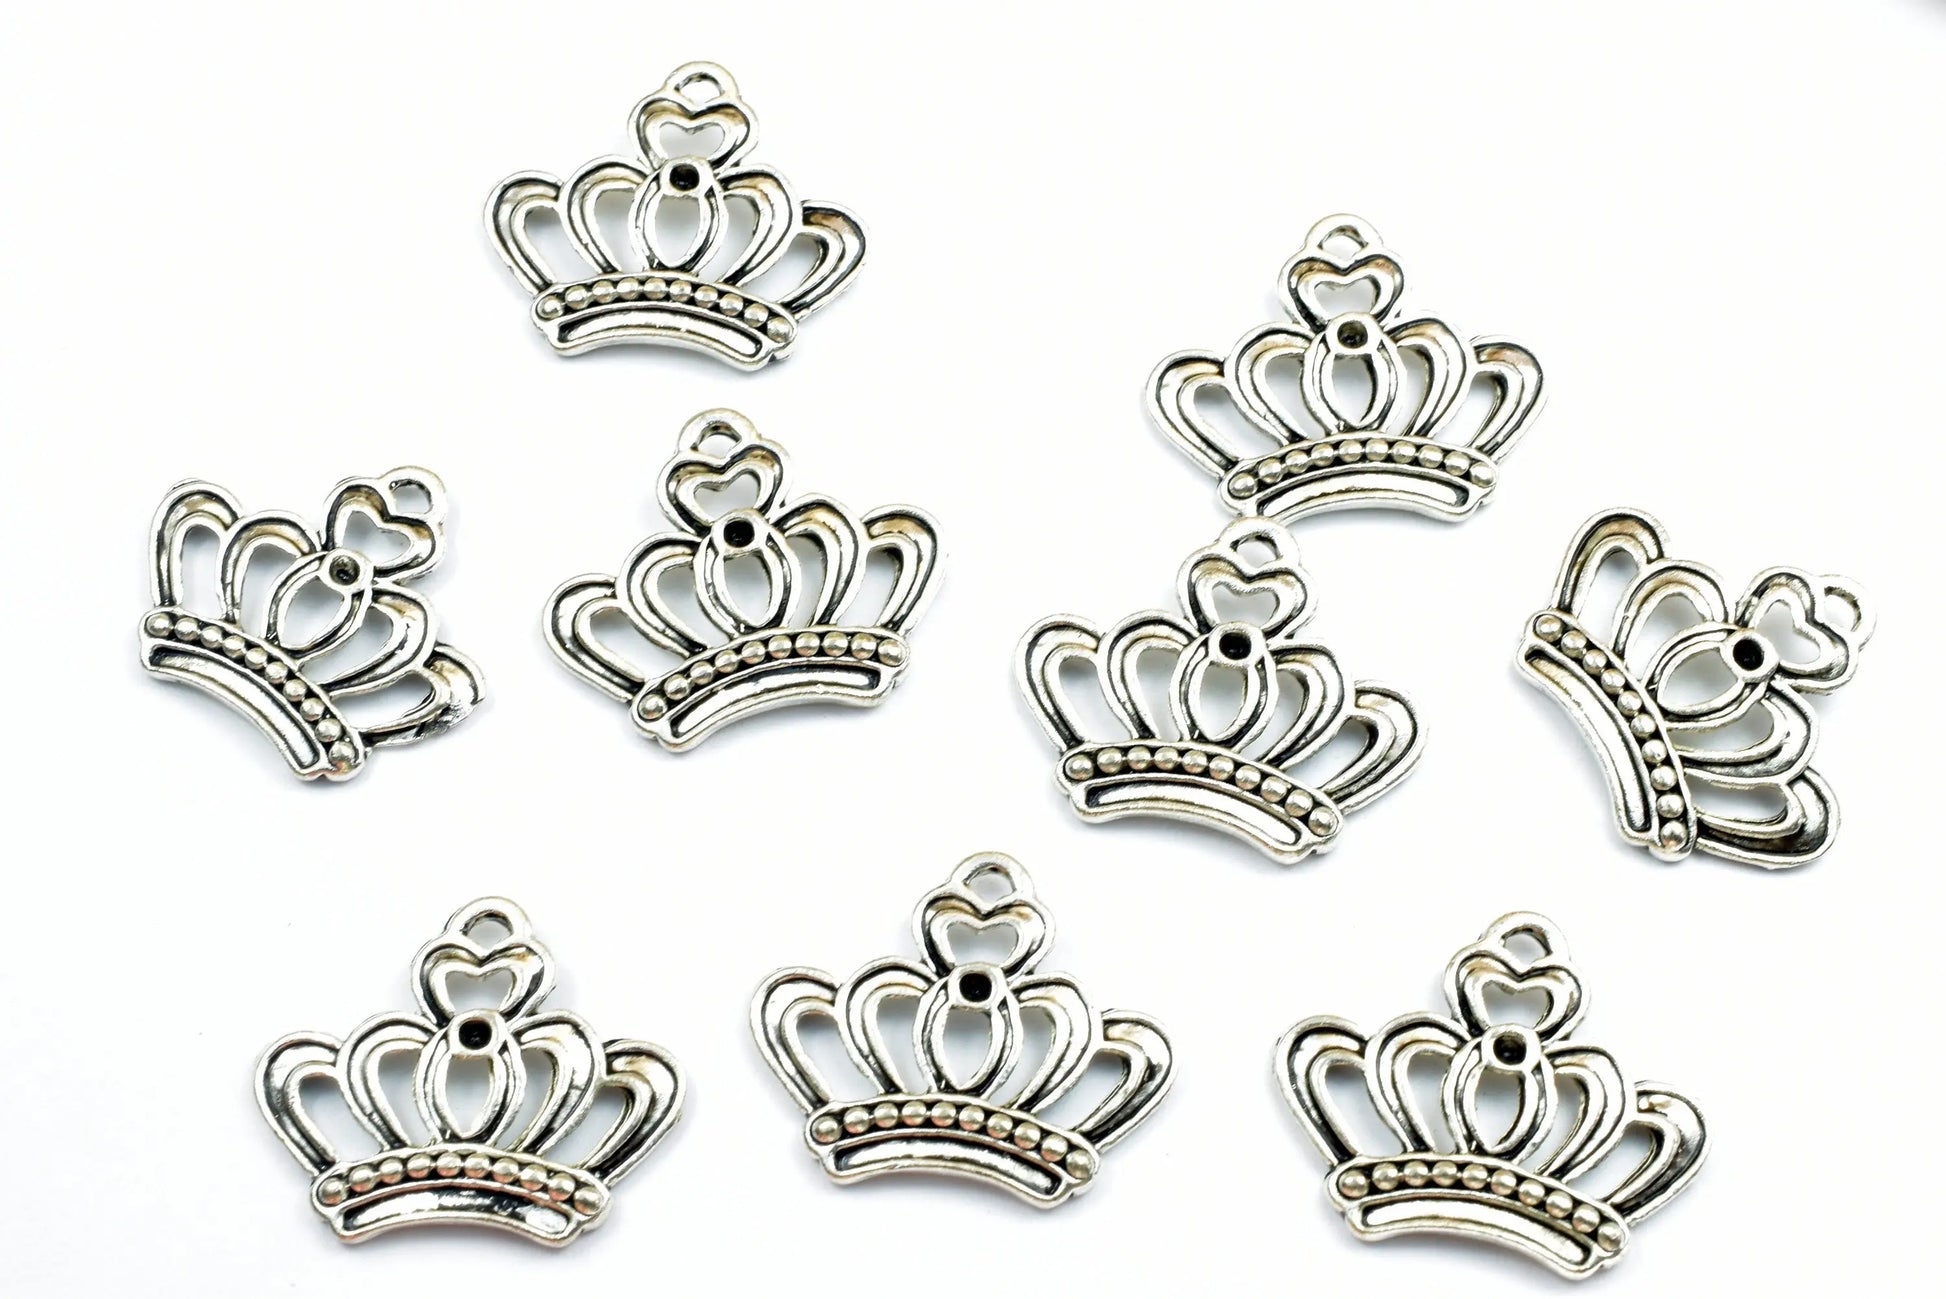 Crown Charm Size 17x16mm, 18x22mm Antique Tibetan Silver Tone Princess Charm Pendant Finding For Jewelry Making - BeadsFindingDepot